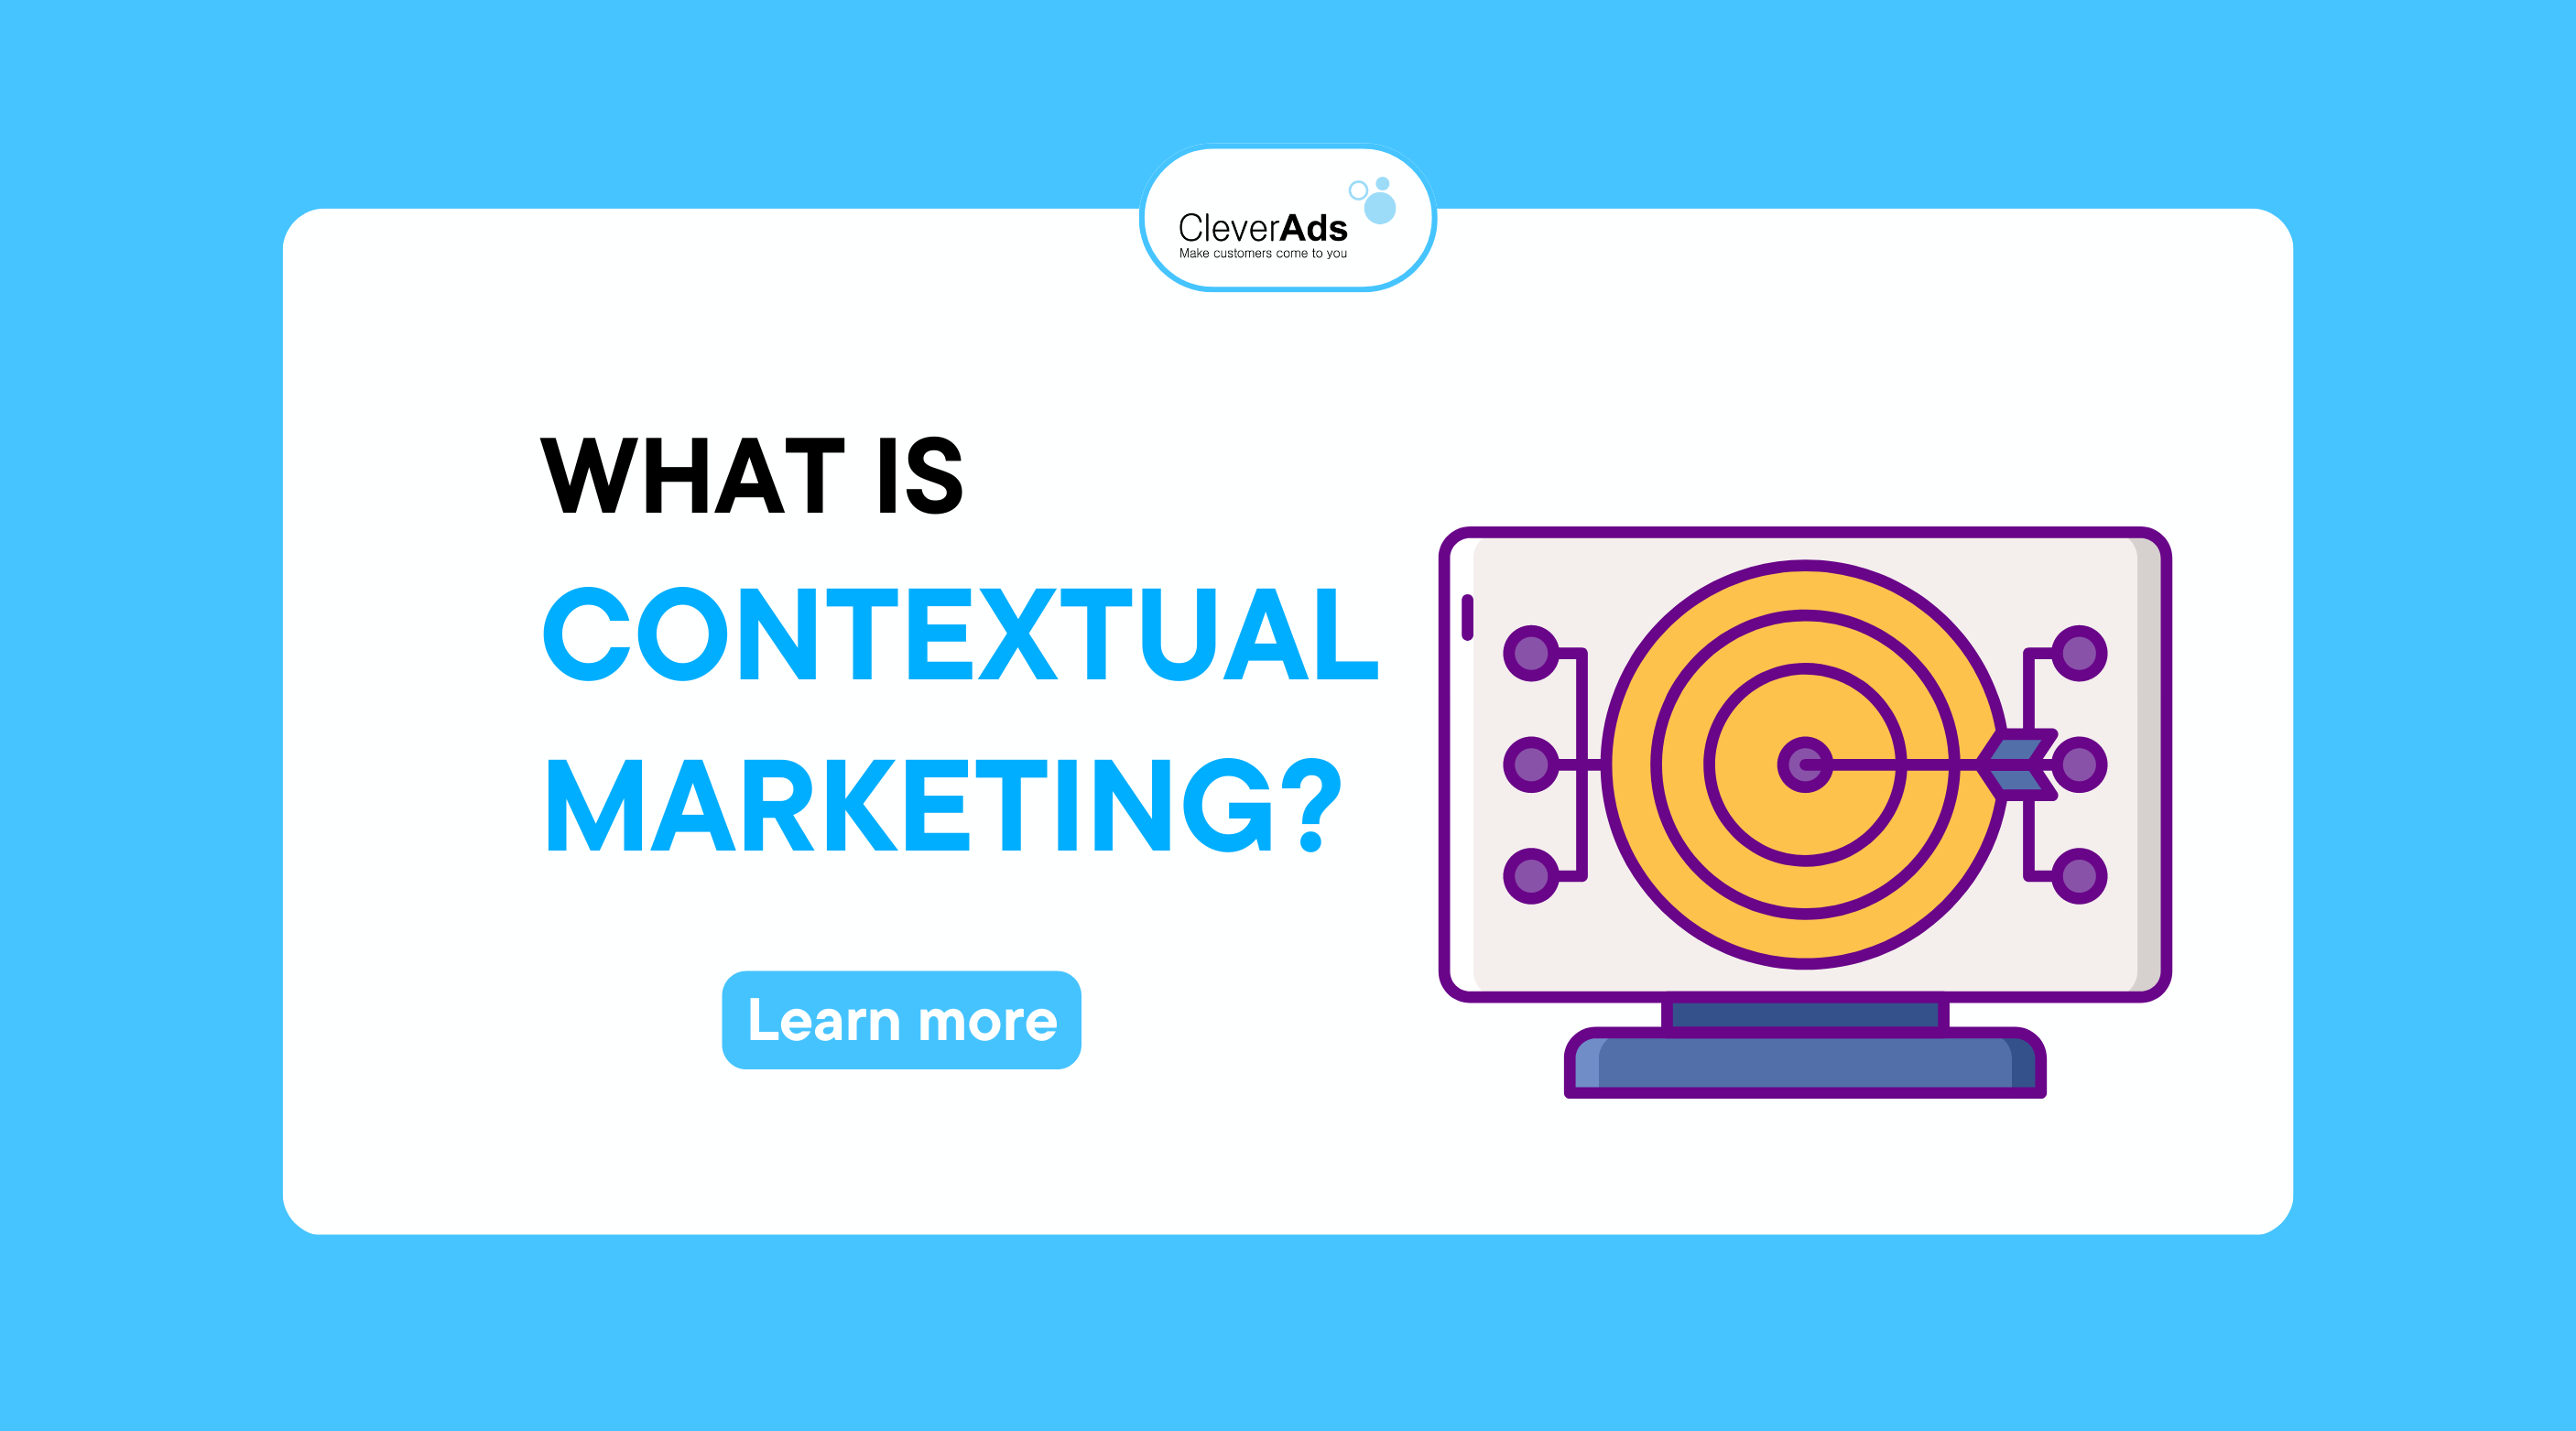 What is Contextual Marketing?